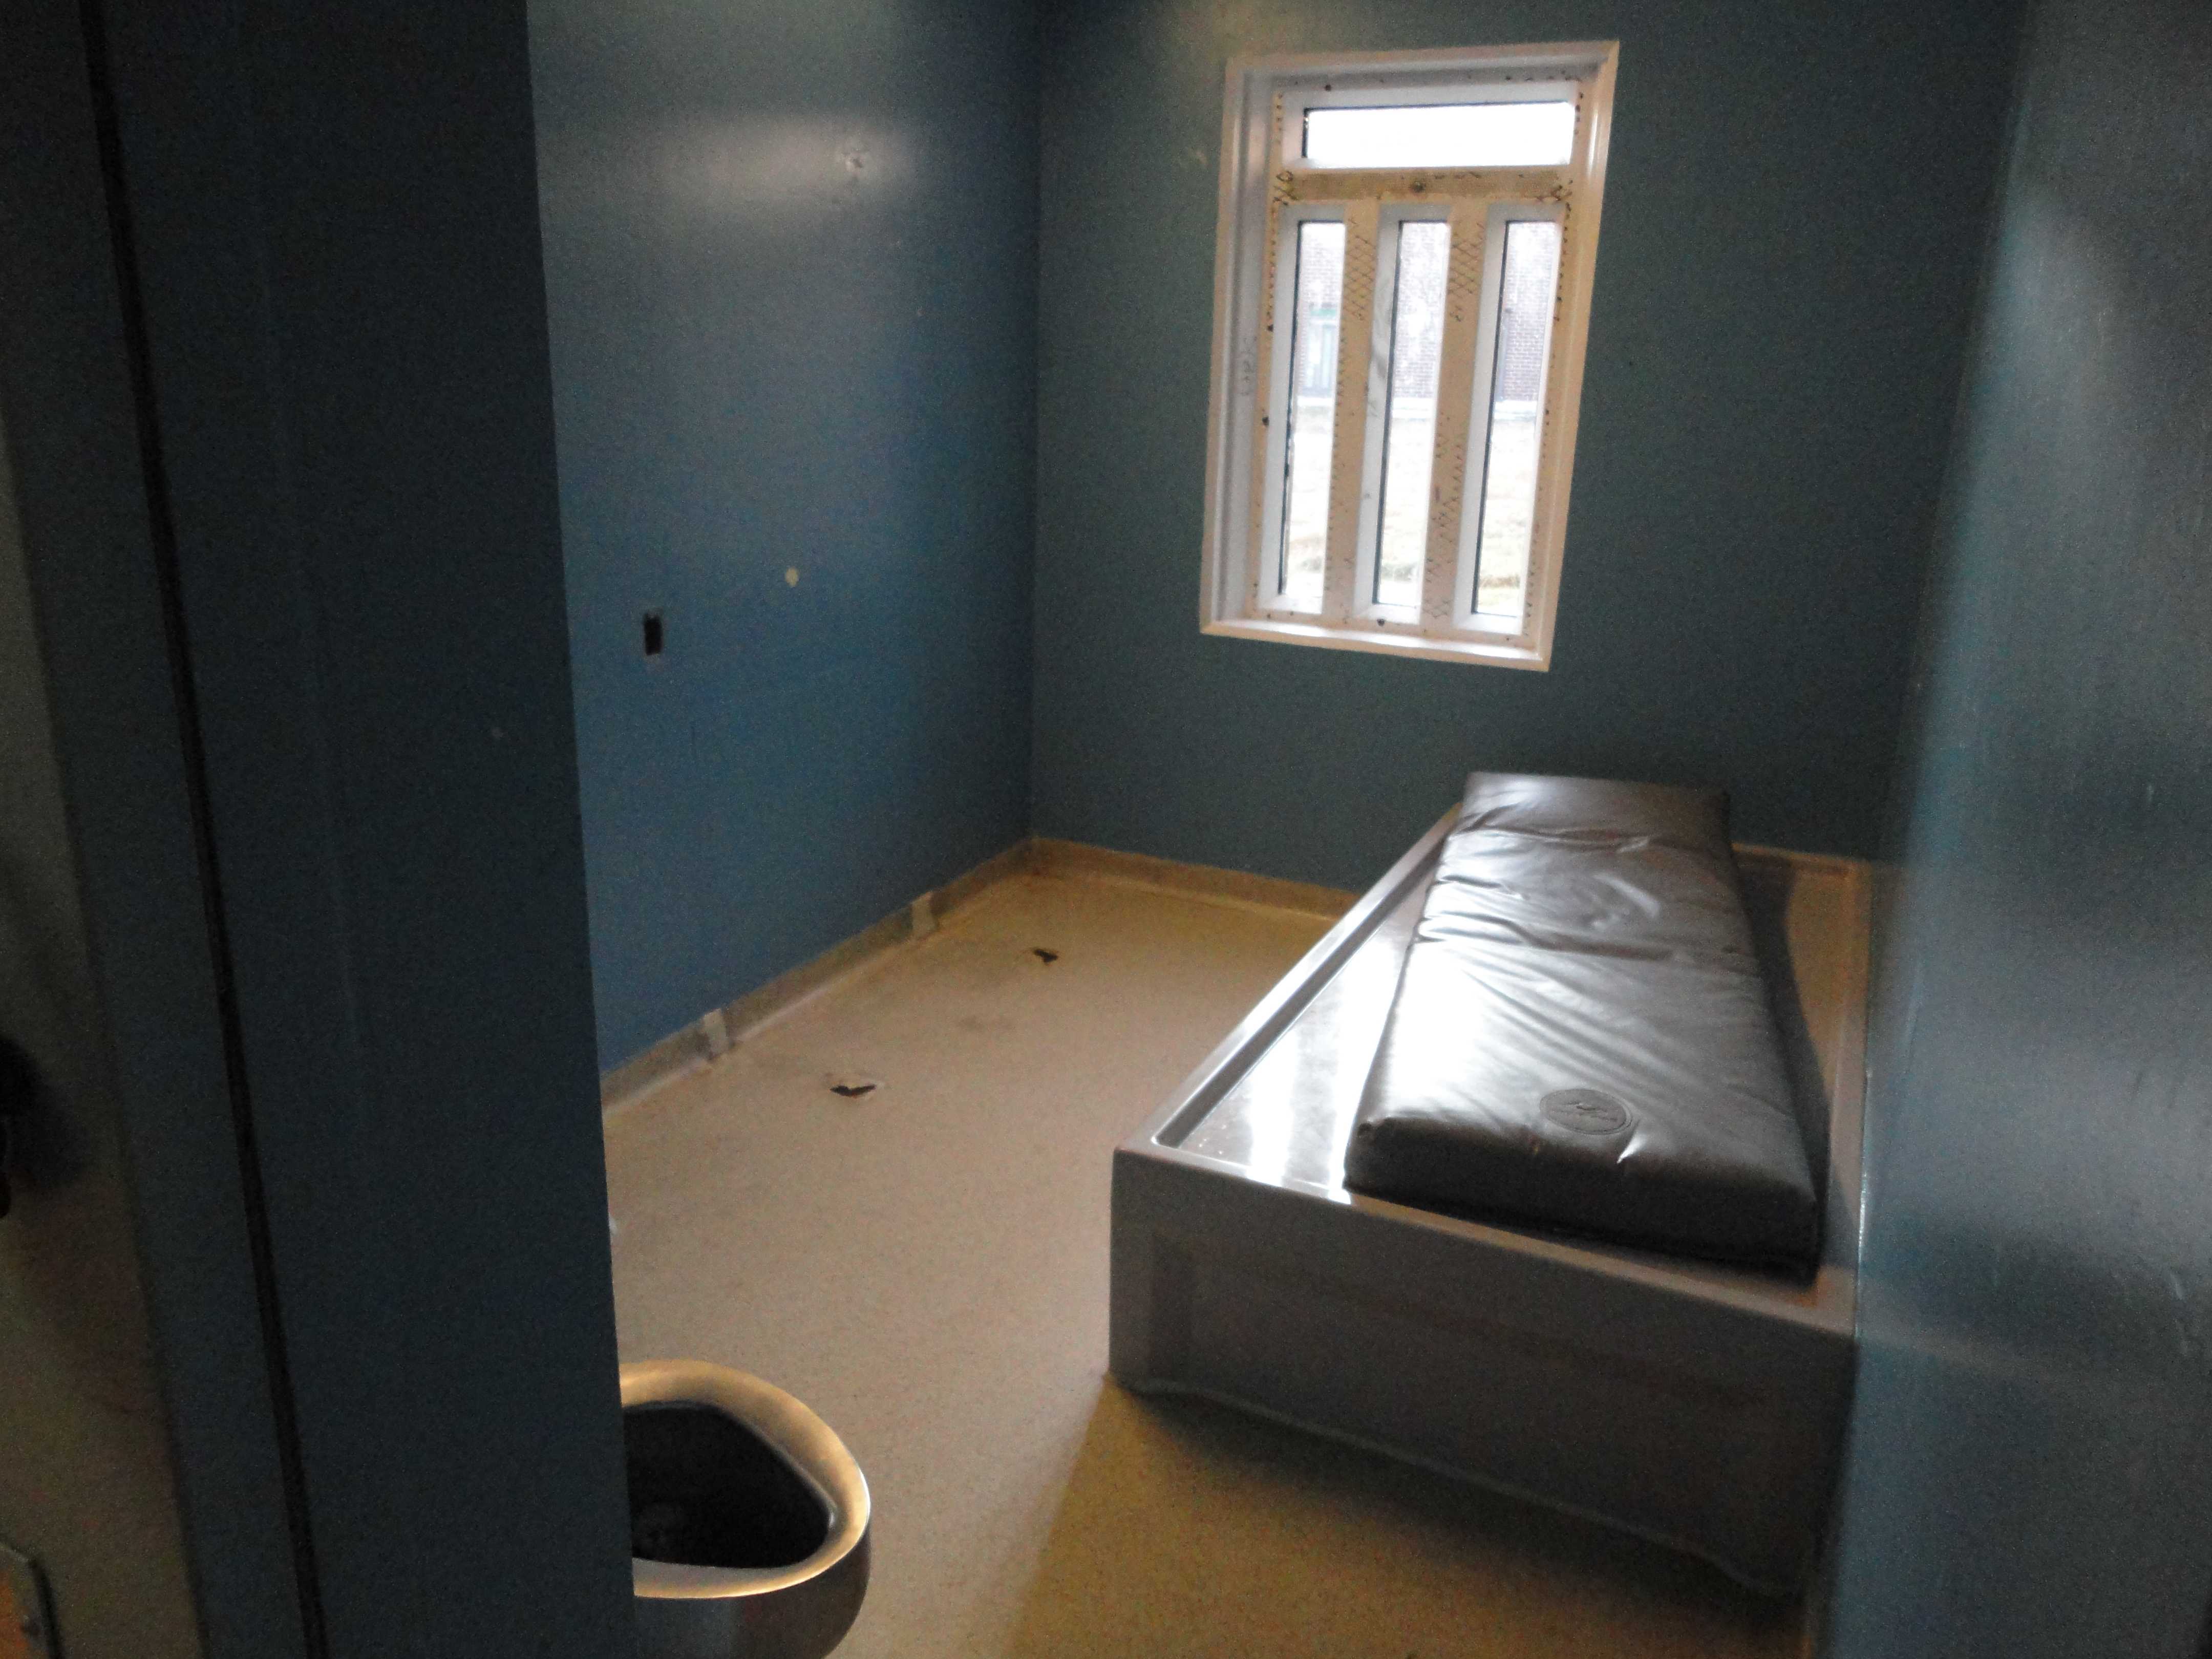 Photo of an unoccupied Therapeutic Range cell at Atlantic Institution